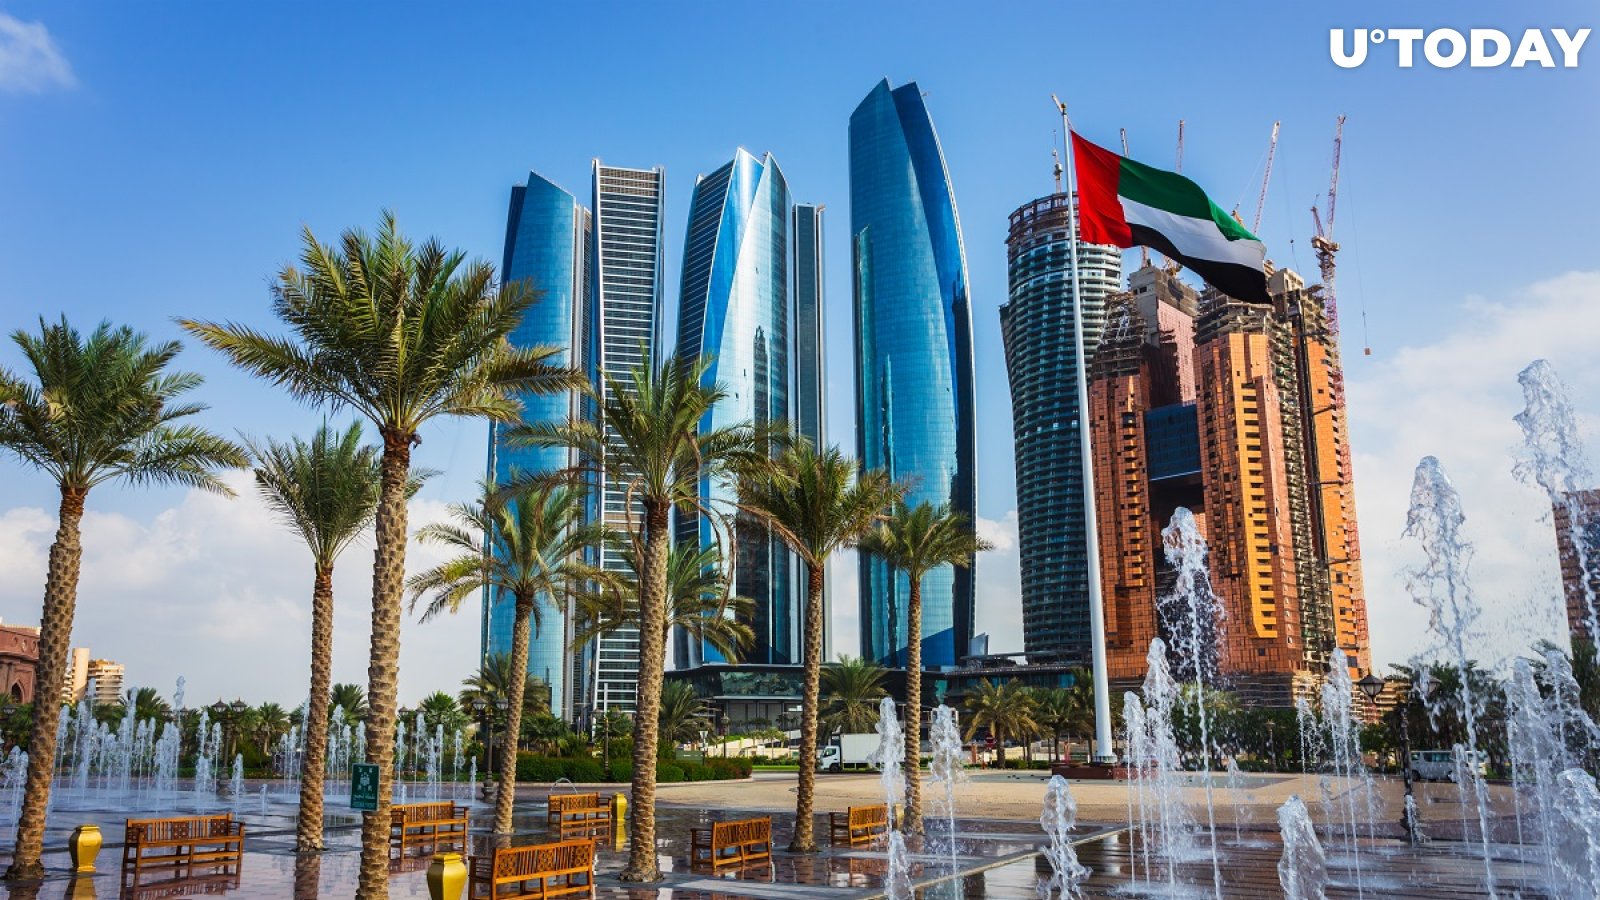 UAE to Develop Its Own Cryptocurrency